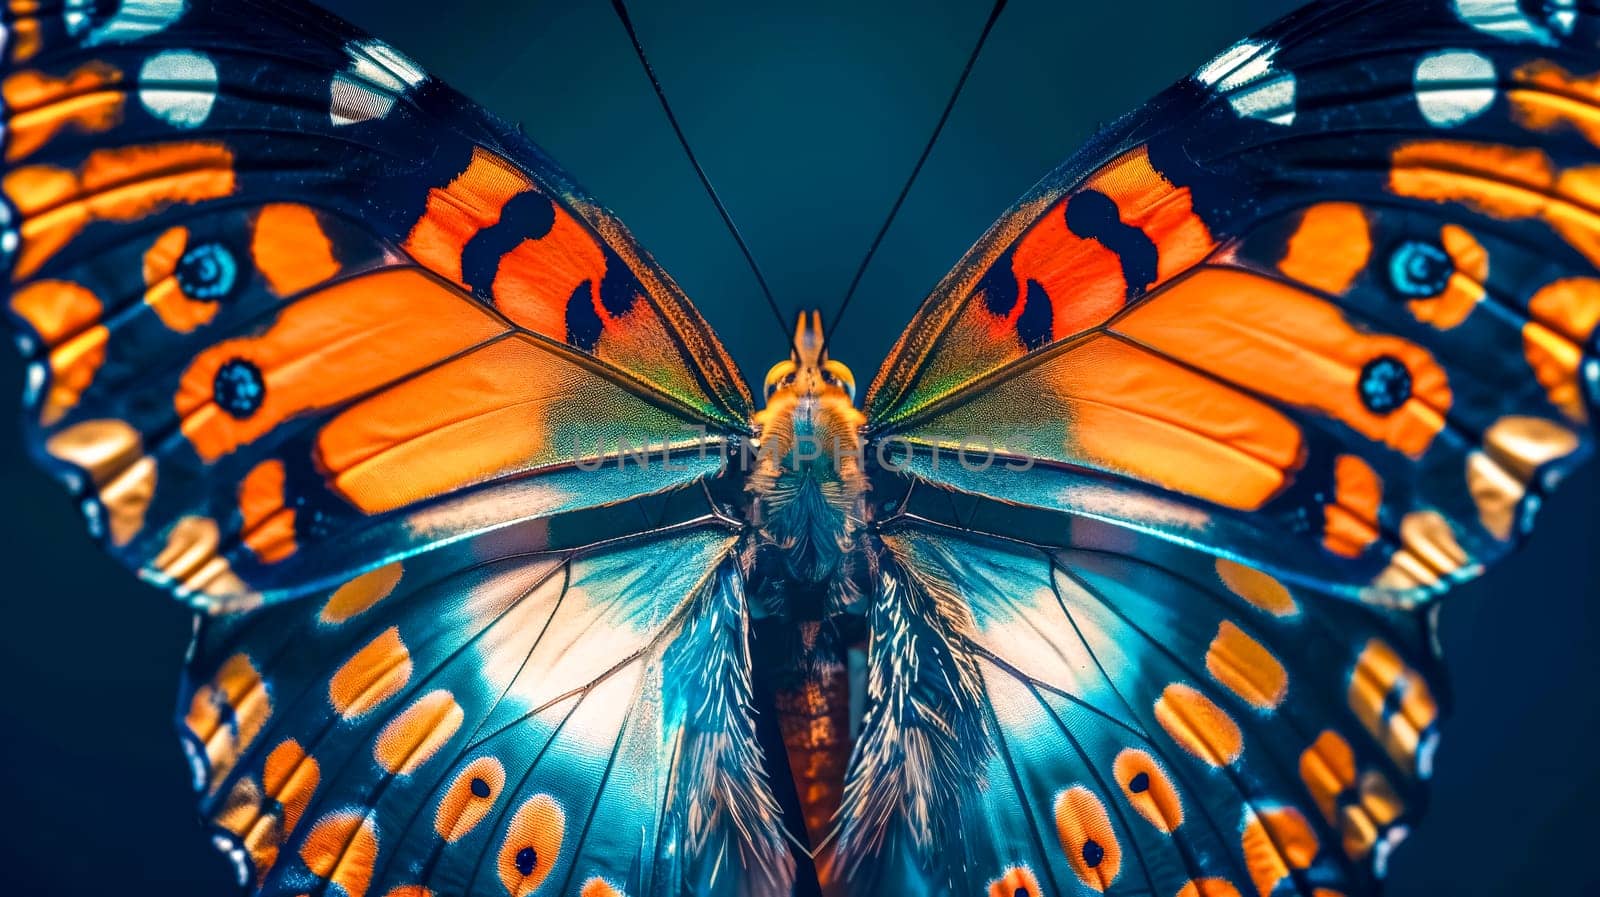 Majestic butterfly with vibrant wings close-up by Edophoto